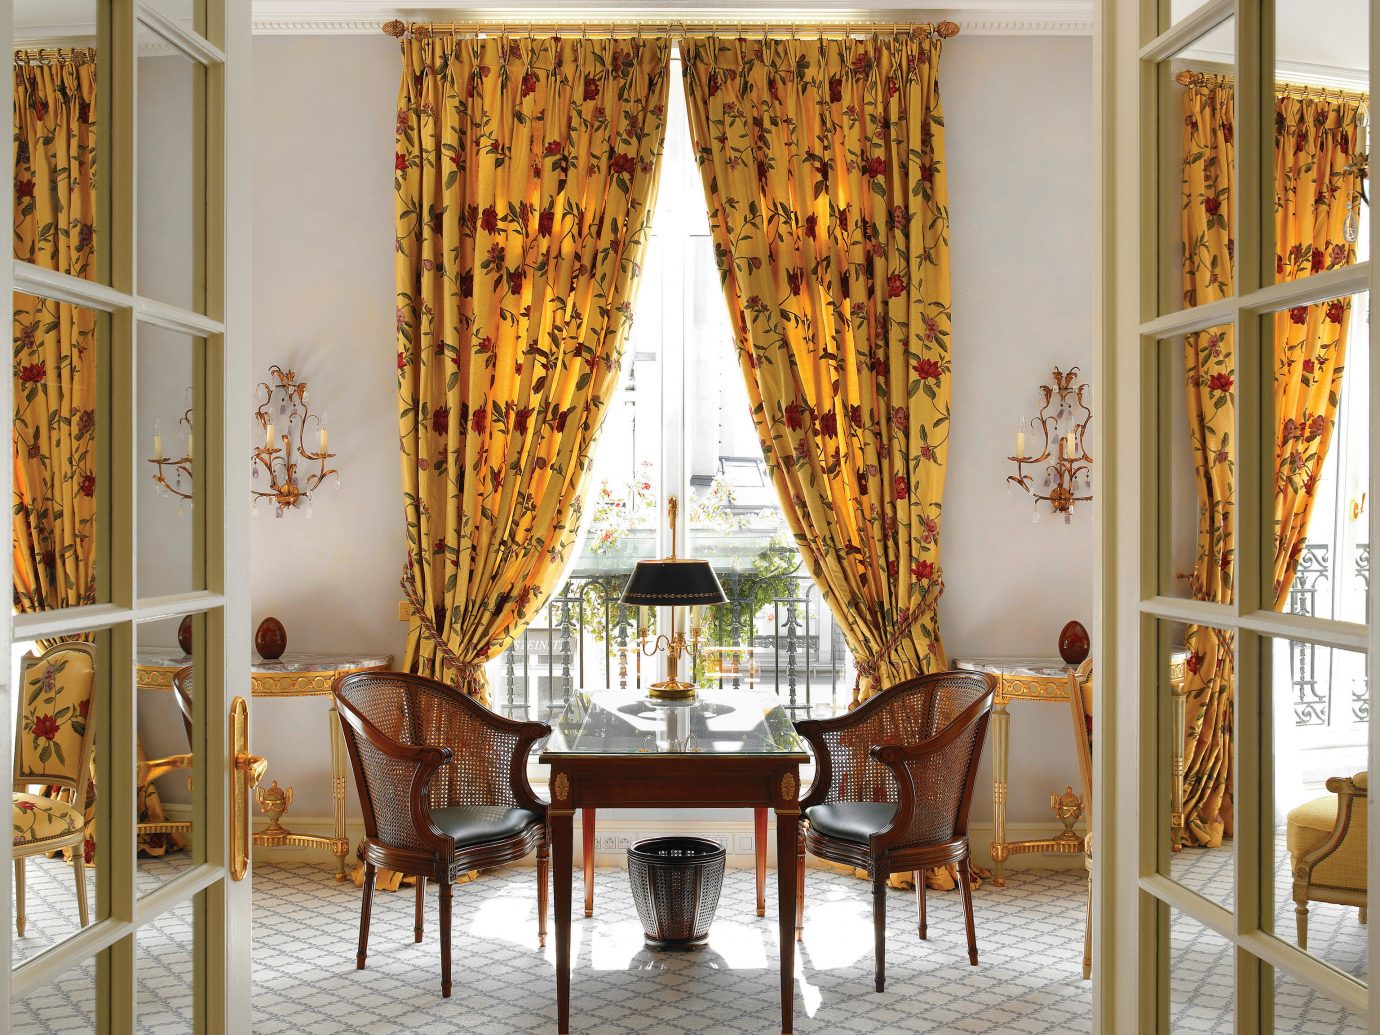 Hotels indoor room dining room curtain interior design window treatment home textile window covering living room Design window